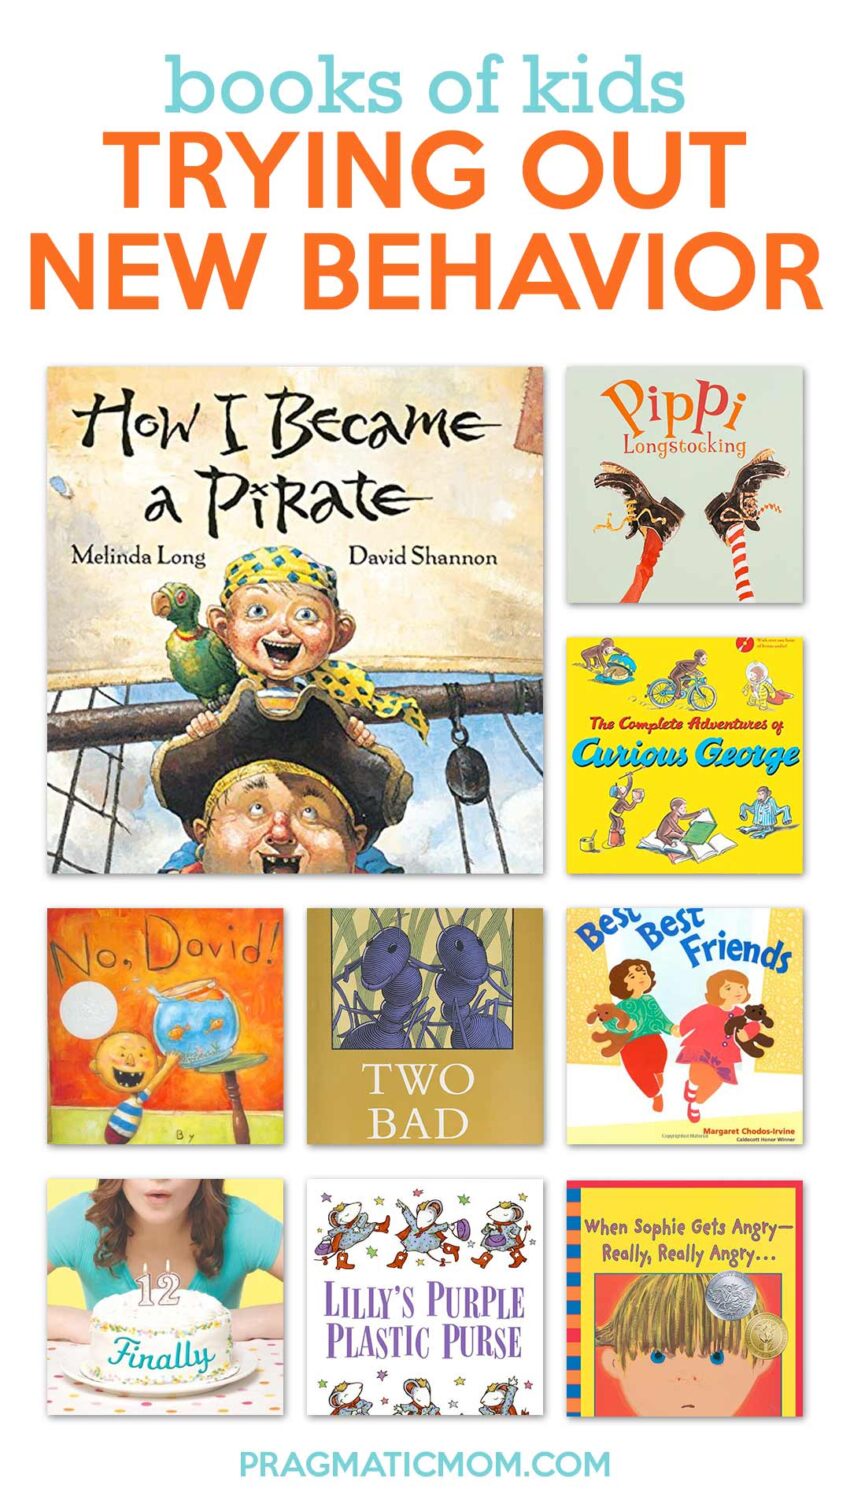 Top 10 Books of Kids Trying Out New Behavior